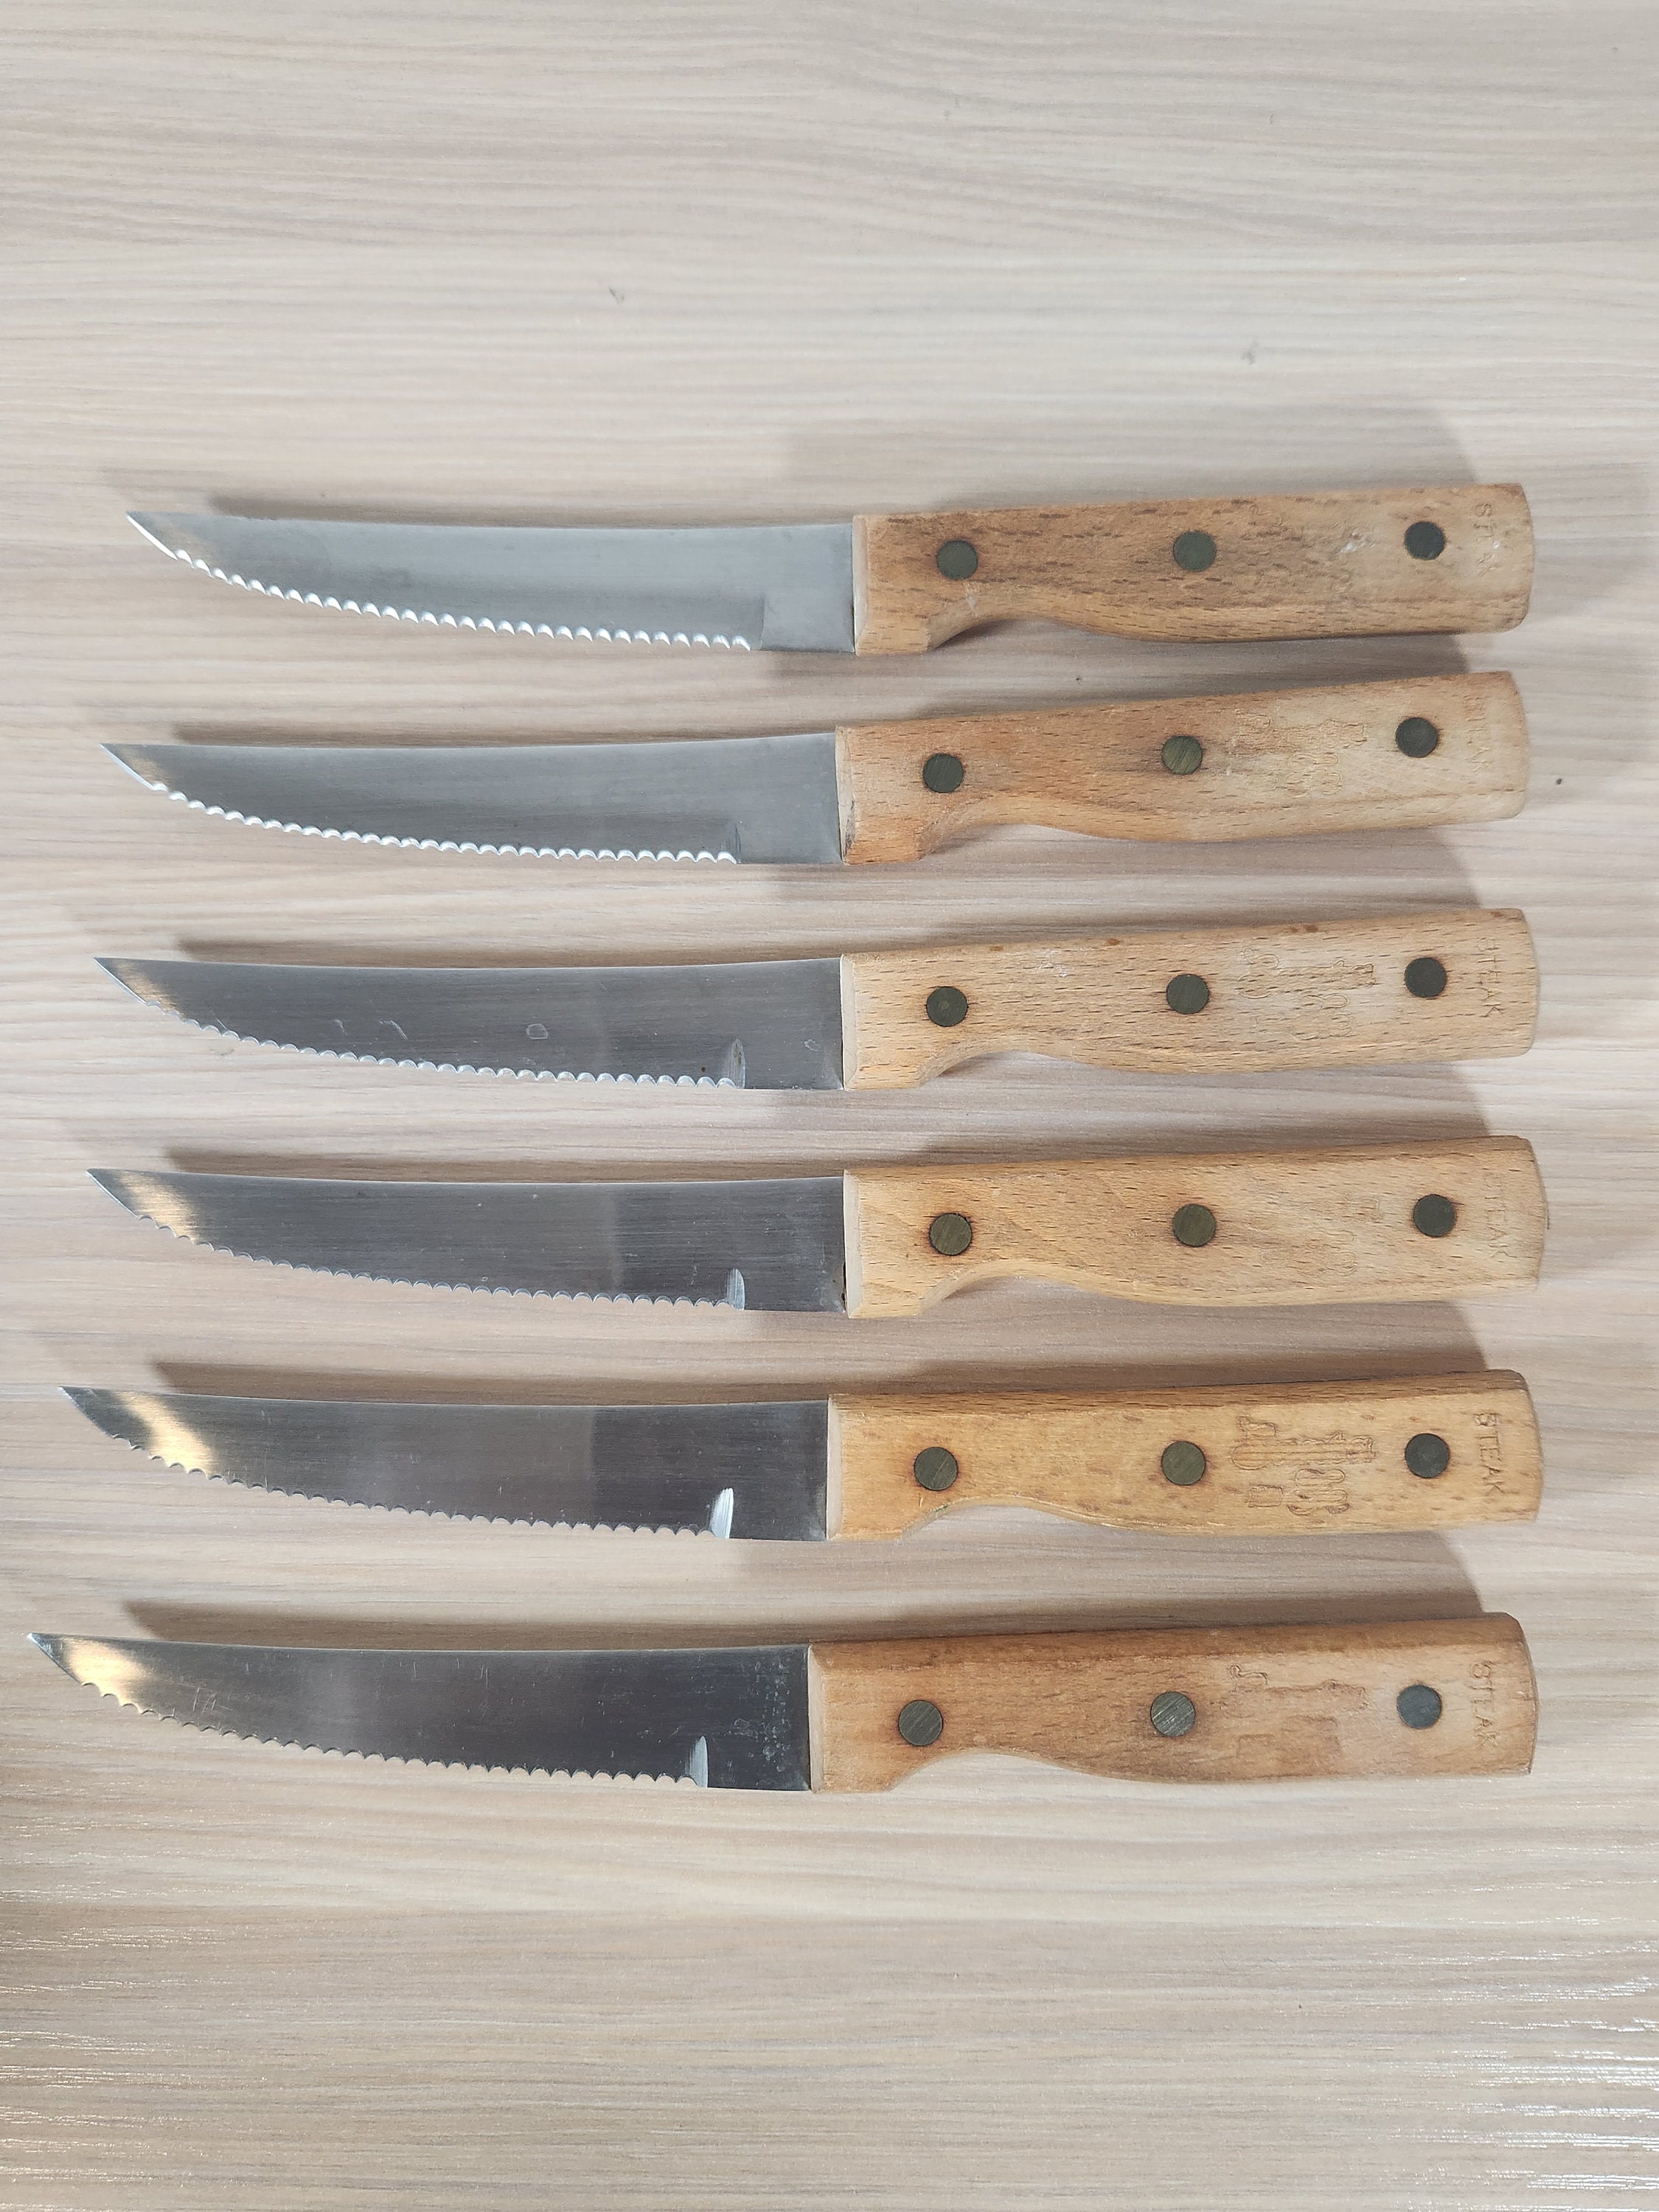 Vintage Japanese Steak Knife Set of 8 Mismatched Wooden Handles Cutlery  Carving Knives BBQ Cookout Parrilla Kitchen Cutlery Panchosporch 